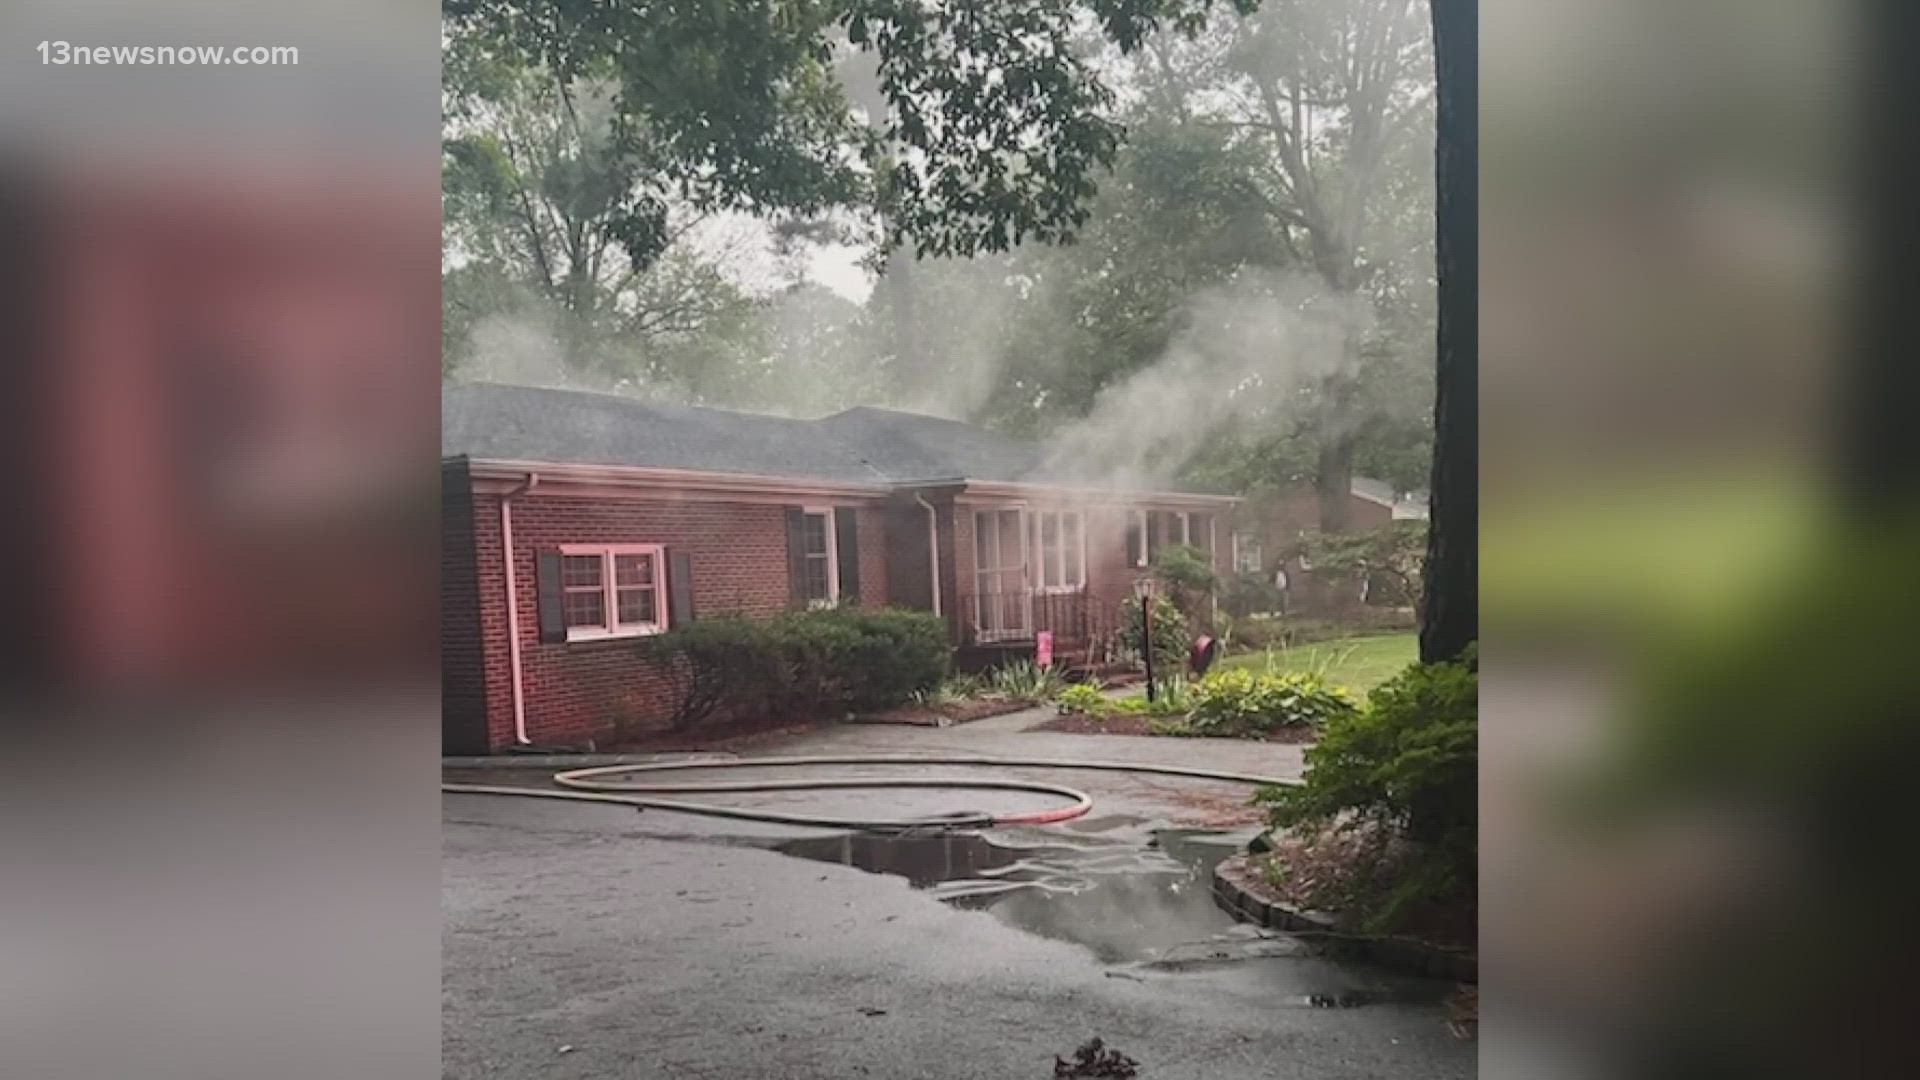 Two people displaced after lightning strike causes house fire in Suffolk 13newsnow